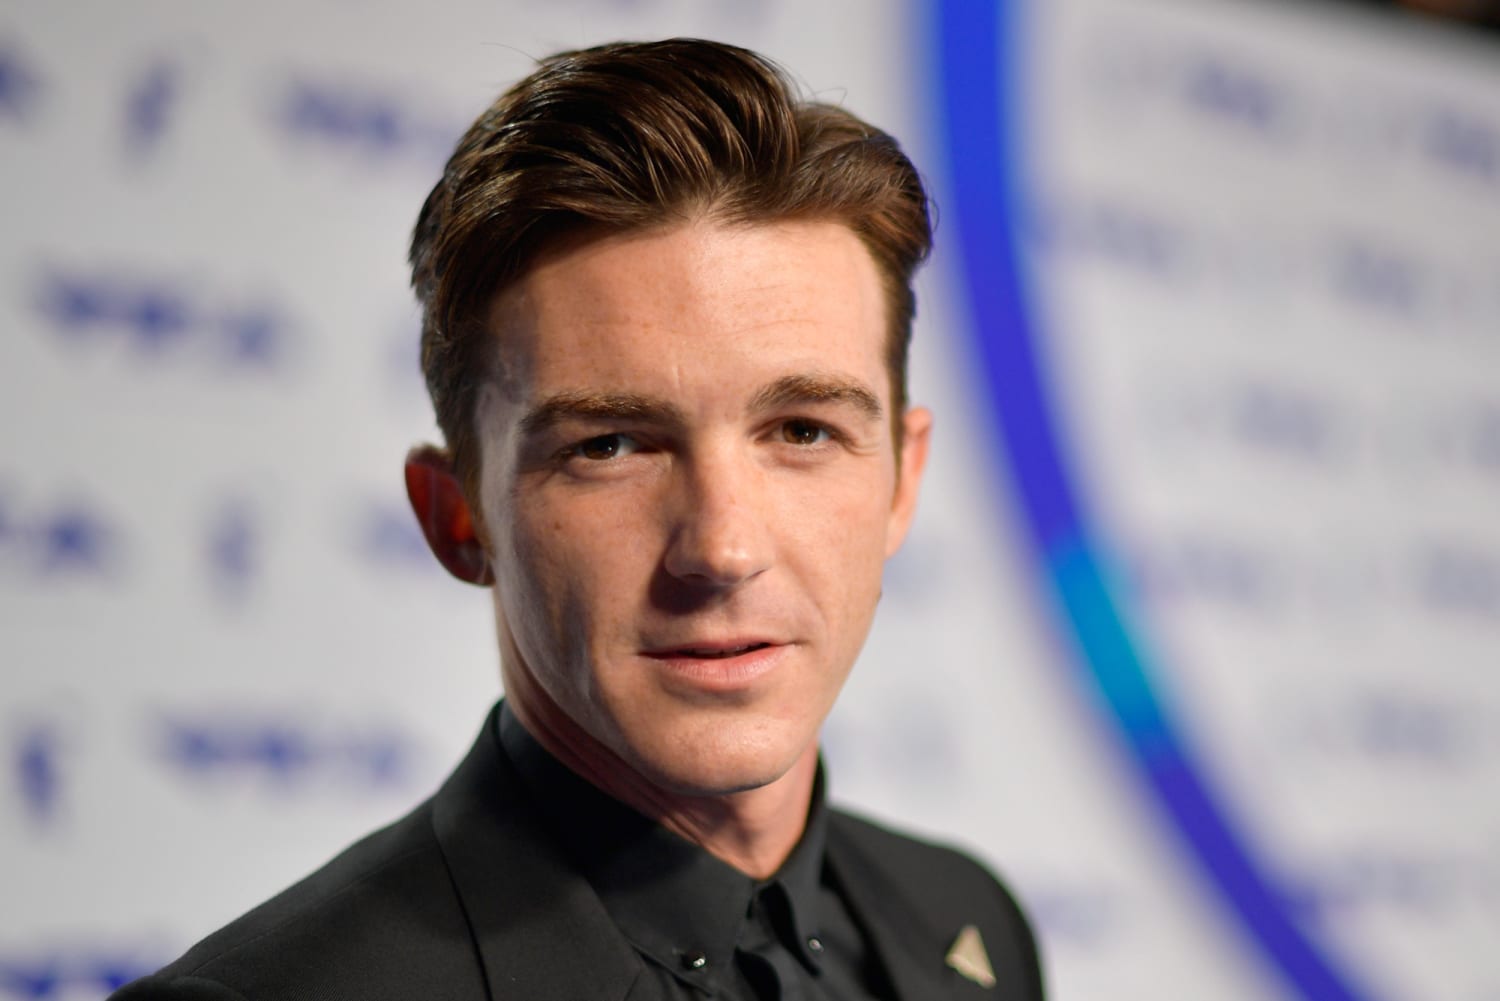 Former Nickelodeon star Drake Bell found safe after being reported missing in Florida, police say